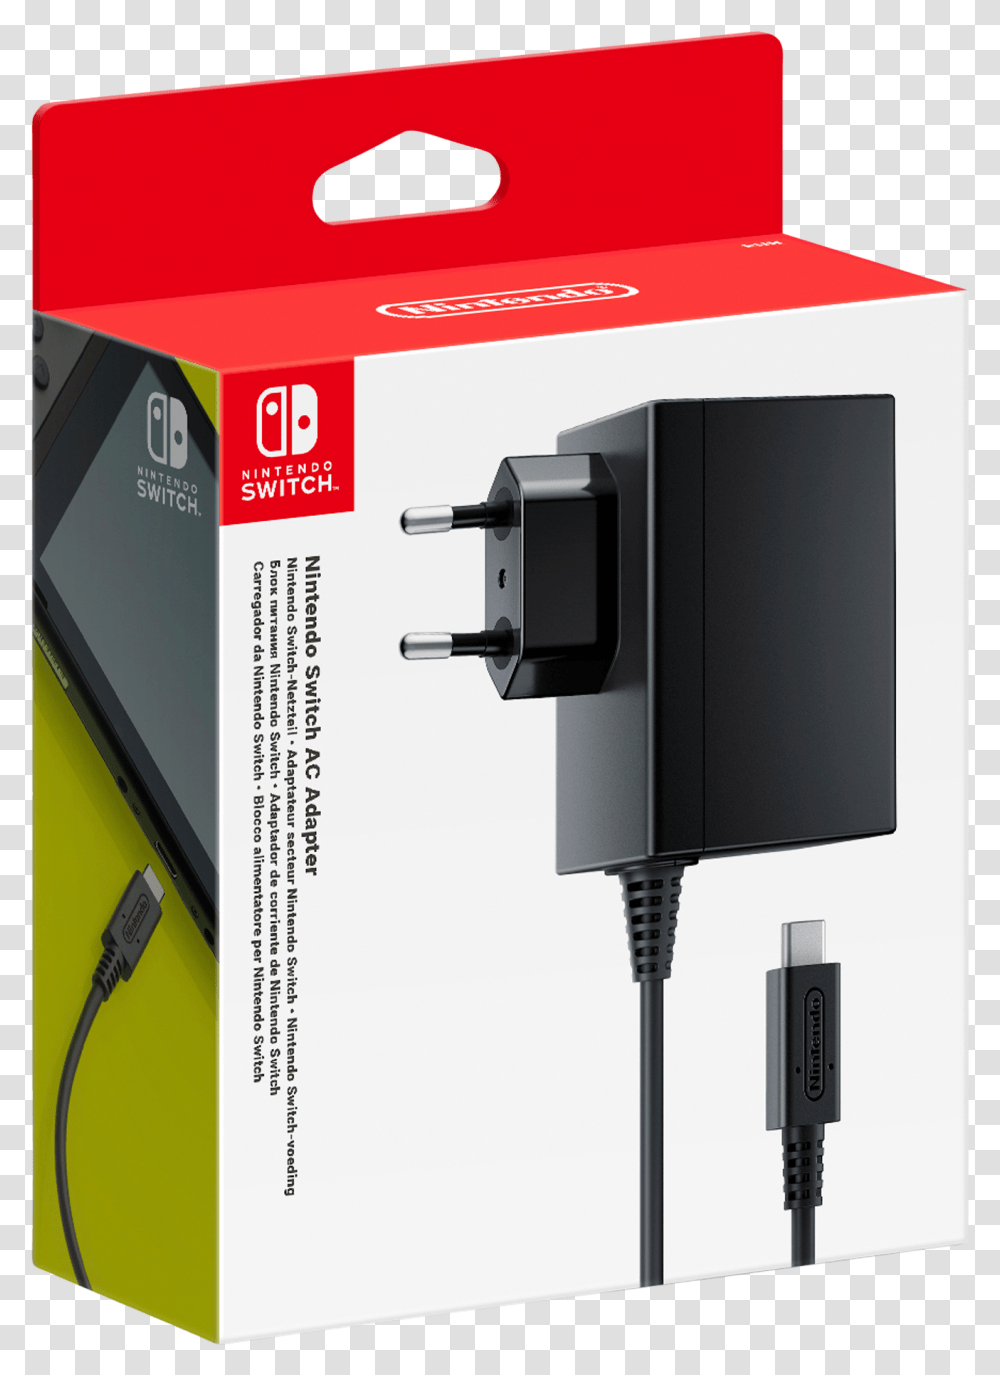 Toys R Us Nintendo Switch, Adapter, Mailbox, Letterbox, Plug Transparent Png